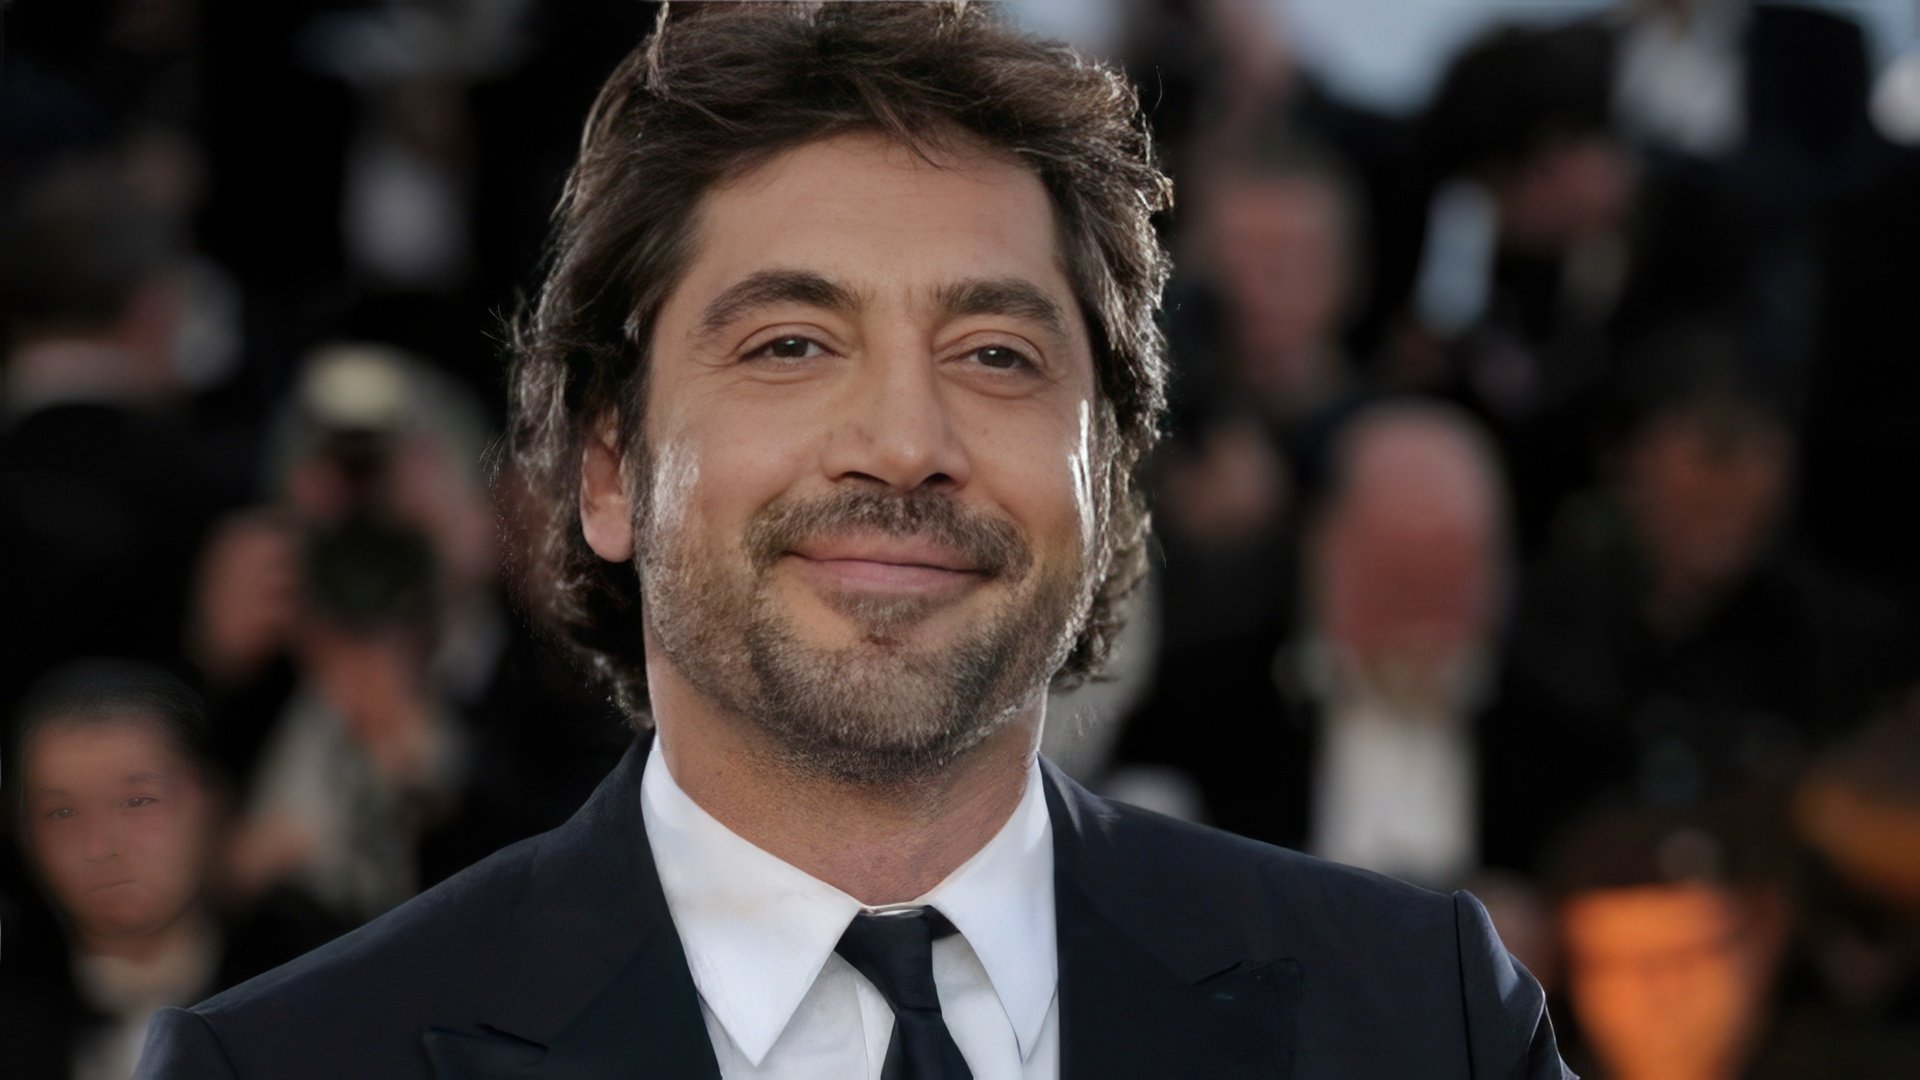 Javier Bardem ‒ the most popular Spaniard in Hollywood